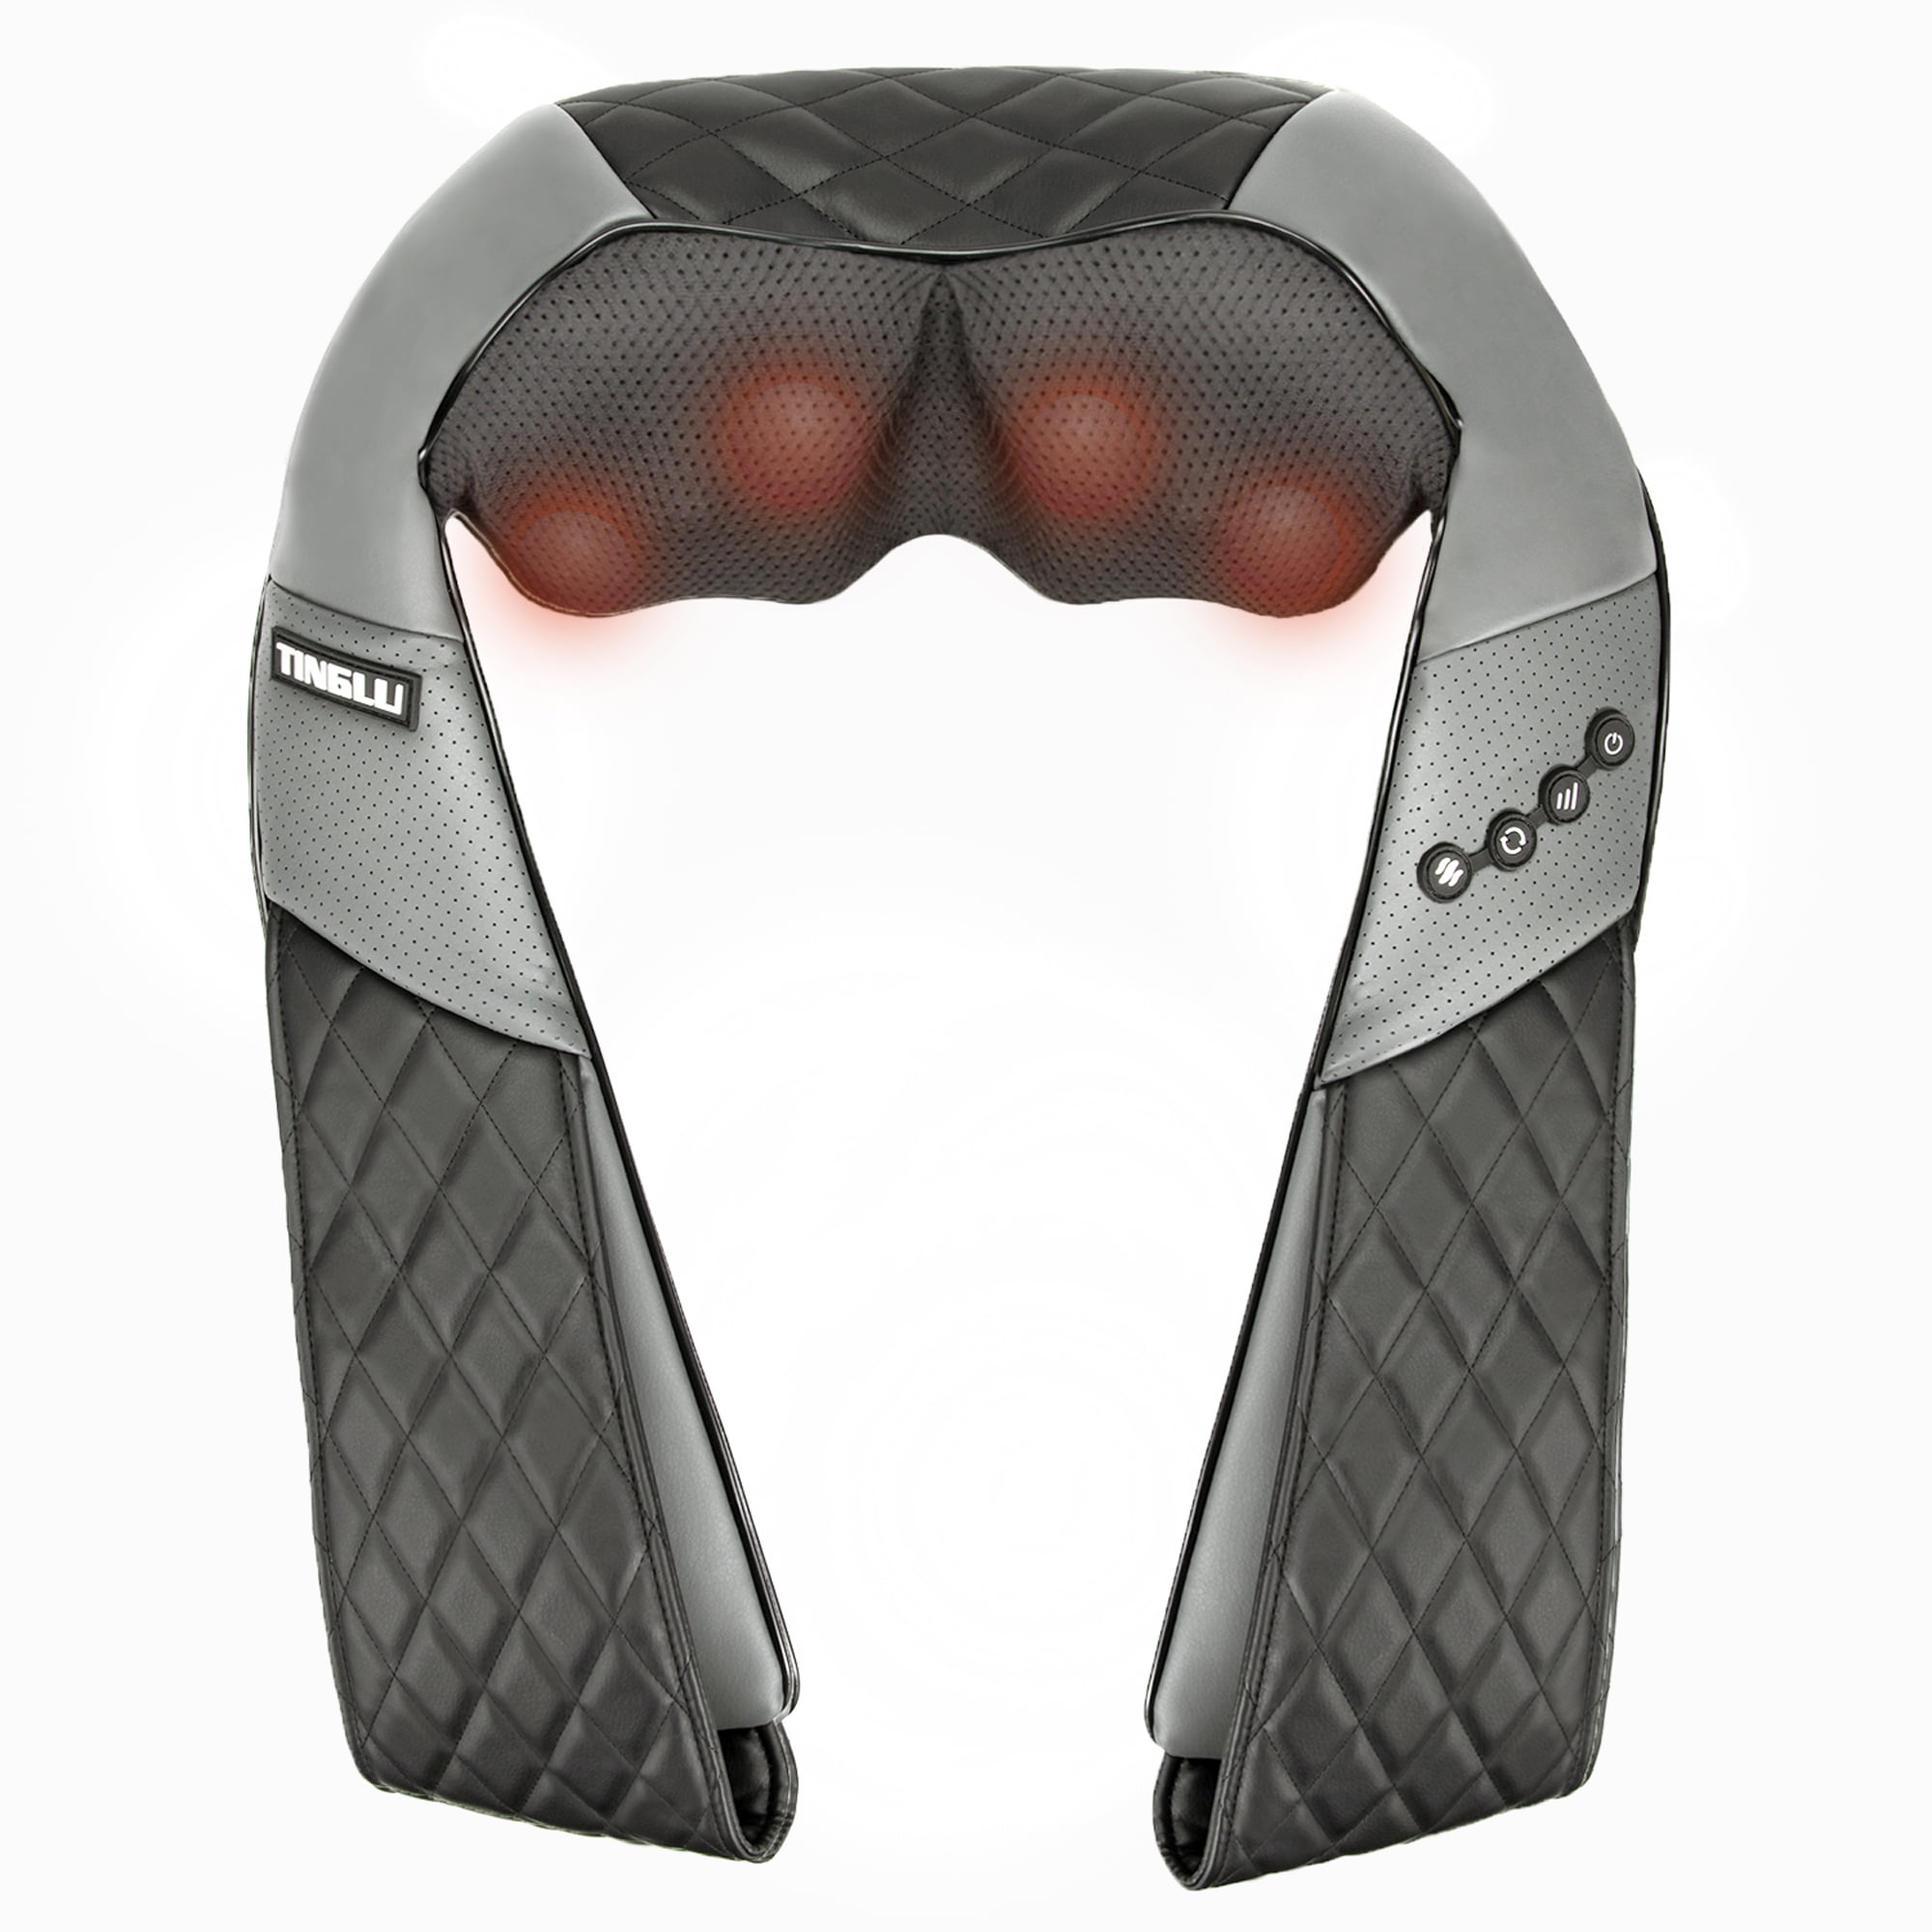 Sayfut Shiatsu Back And Neck Massager With Heat And Deep Kneading Massage For Neck Back And